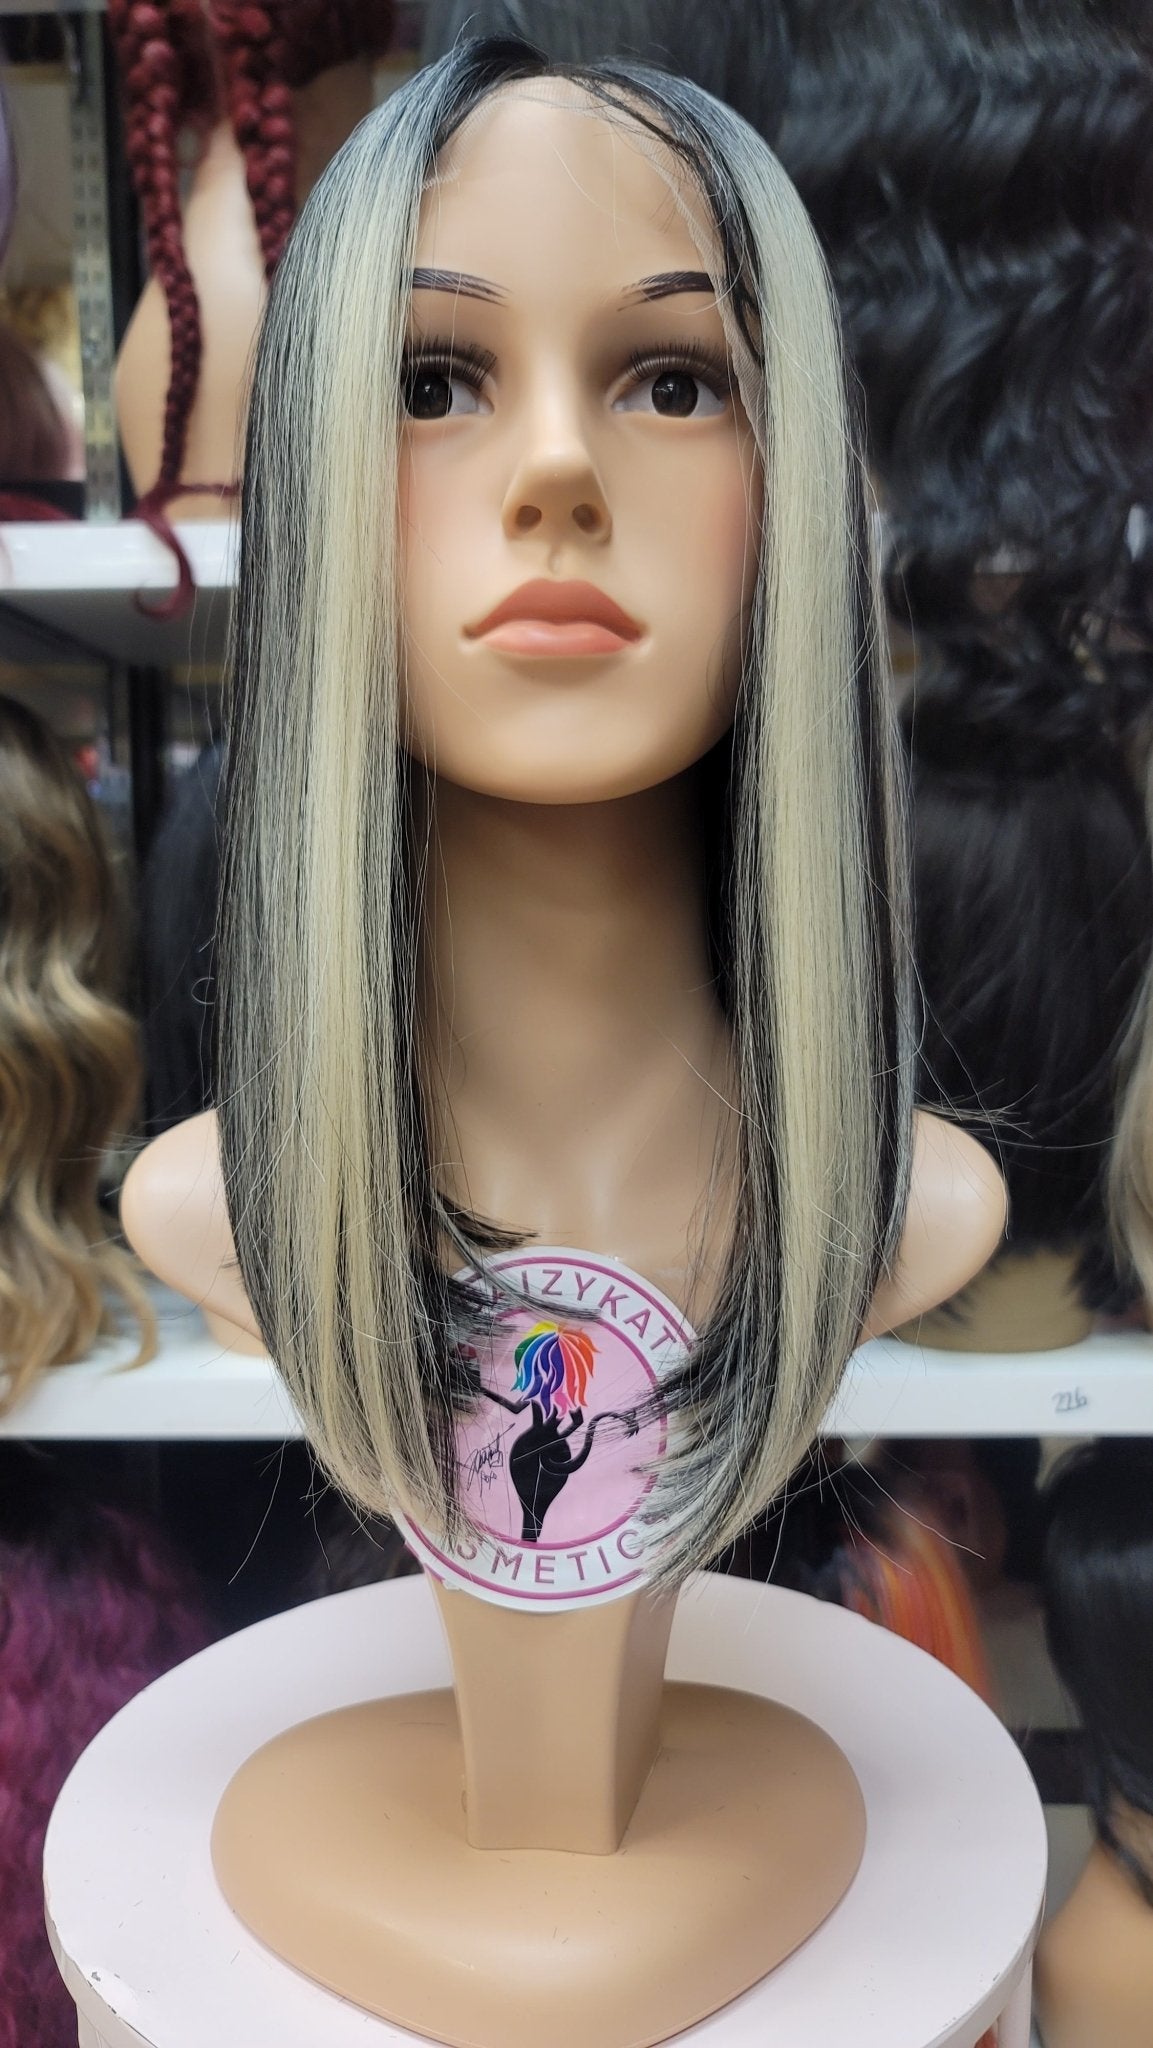 140 Tokyo - Middle Part Lace Front Wig - 1B/613 - DaizyKat Cosmetics 140 Tokyo - Middle Part Lace Front Wig - 1B/613 DaizyKat Cosmetics Wigs